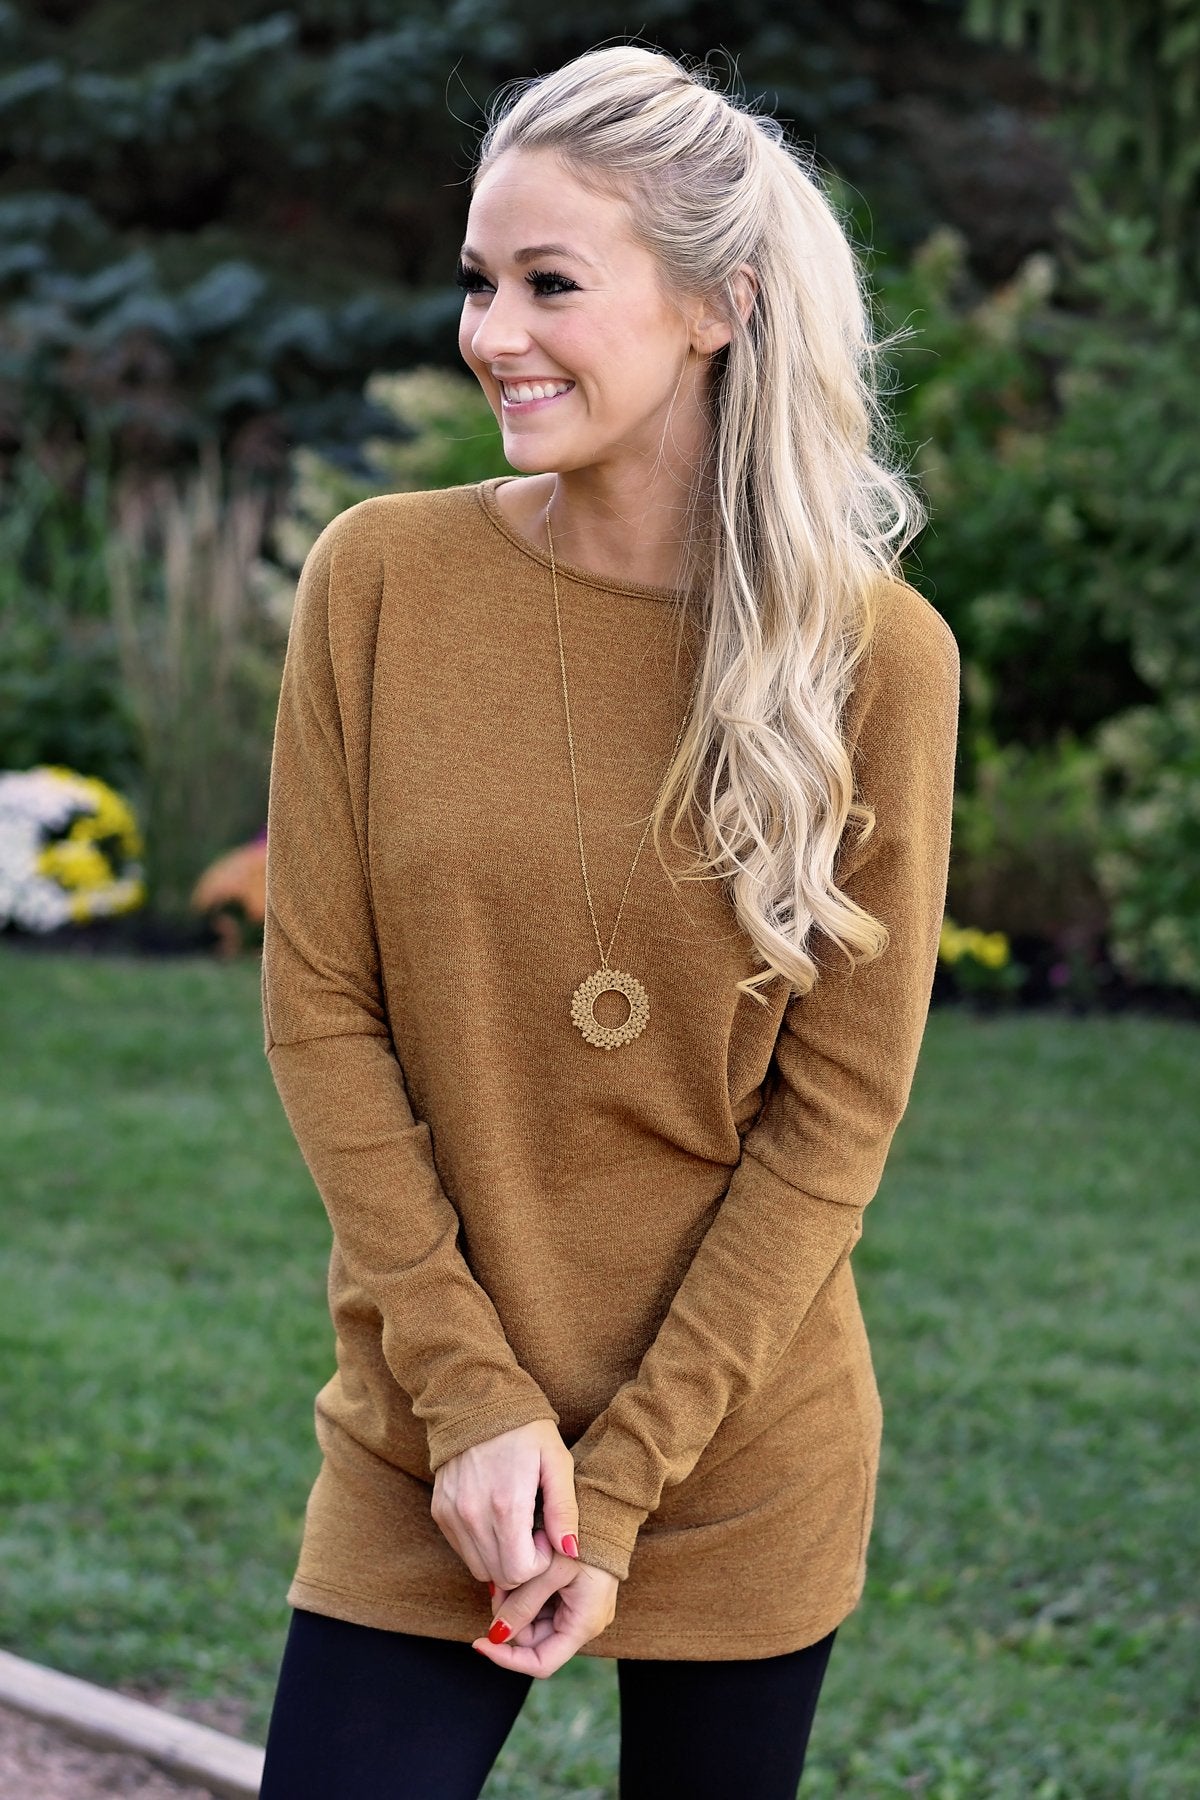 Fall Feels Harvest Gold Tunic Top